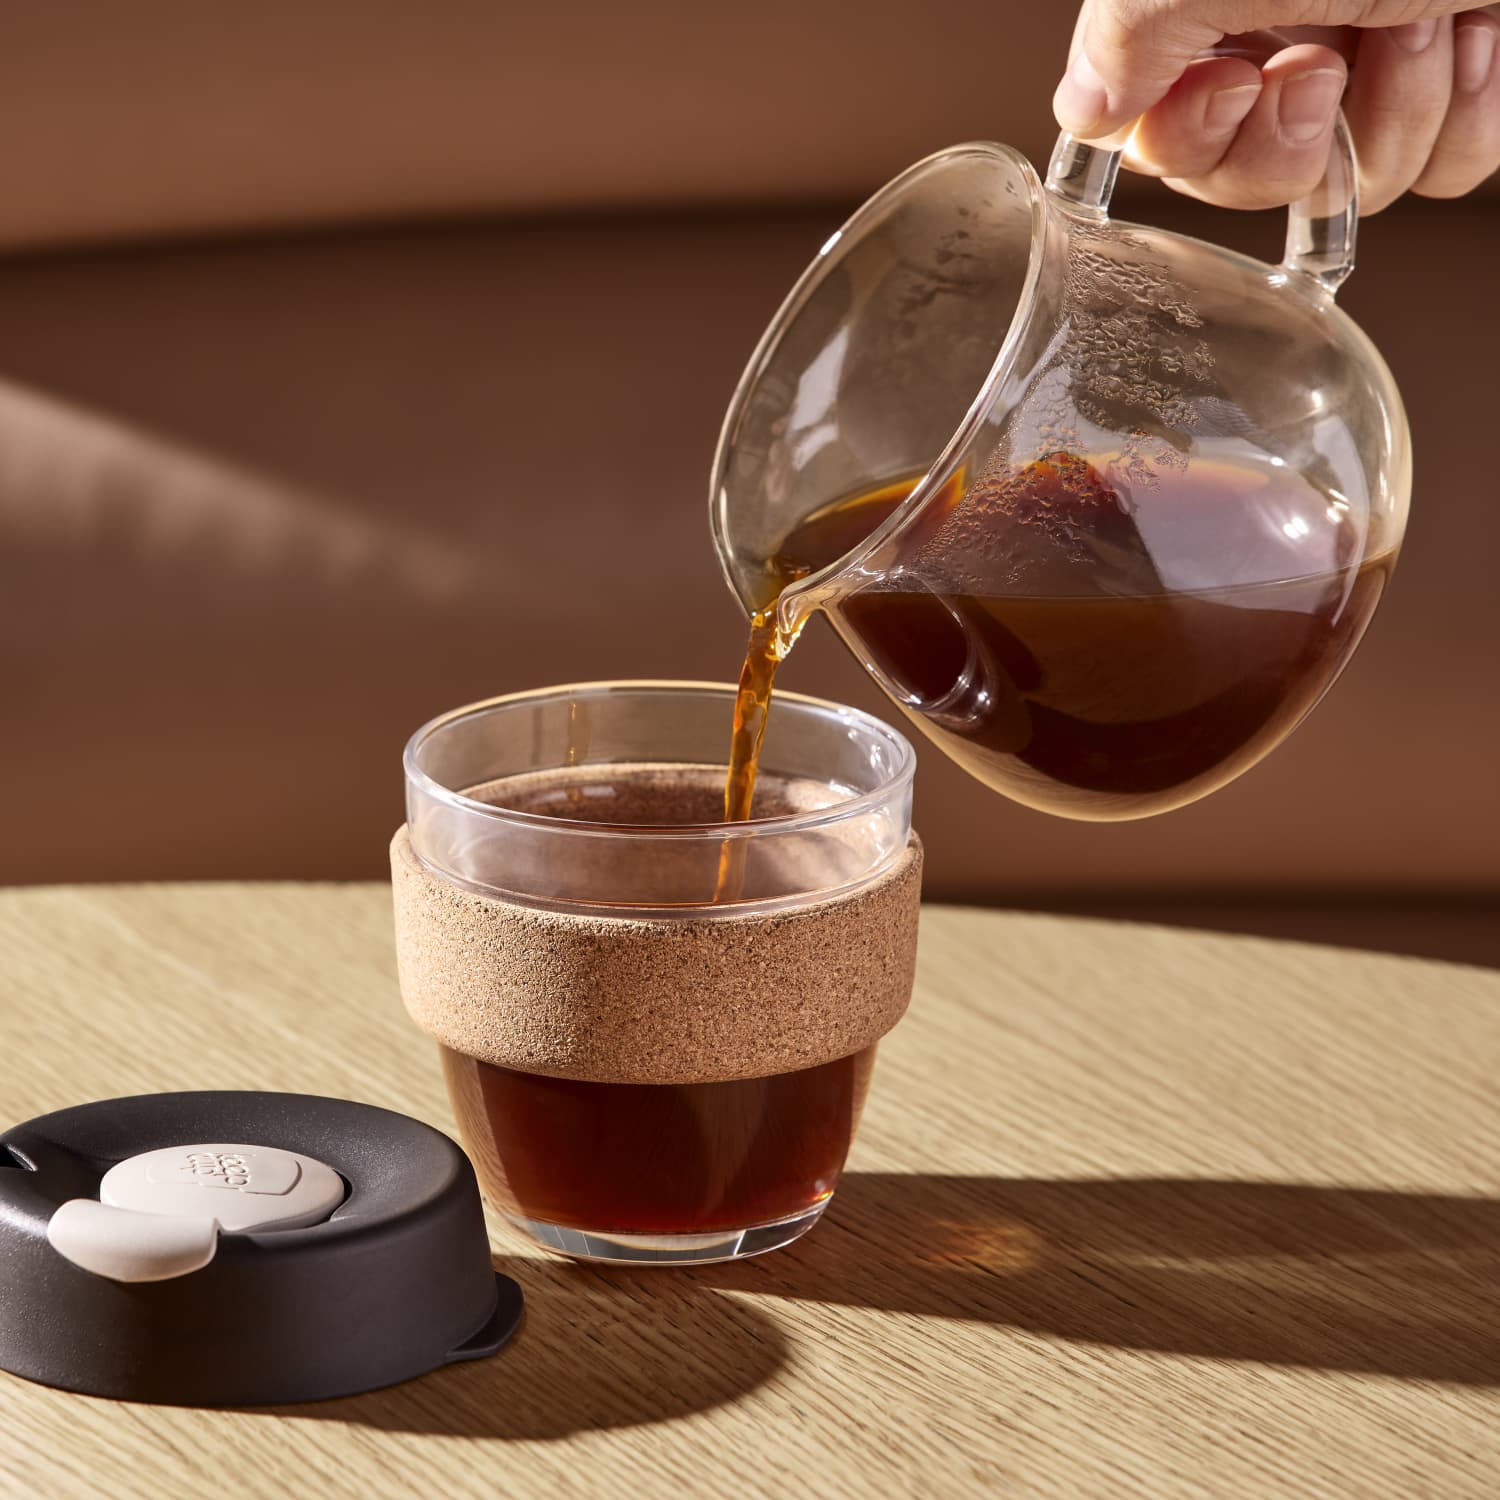 https://cdn.apartmenttherapy.info/image/upload/f_jpg,q_auto:eco,c_fill,g_auto,w_1500,ar_1:1/KeepCup%20Glass%20Coffee%20Cup